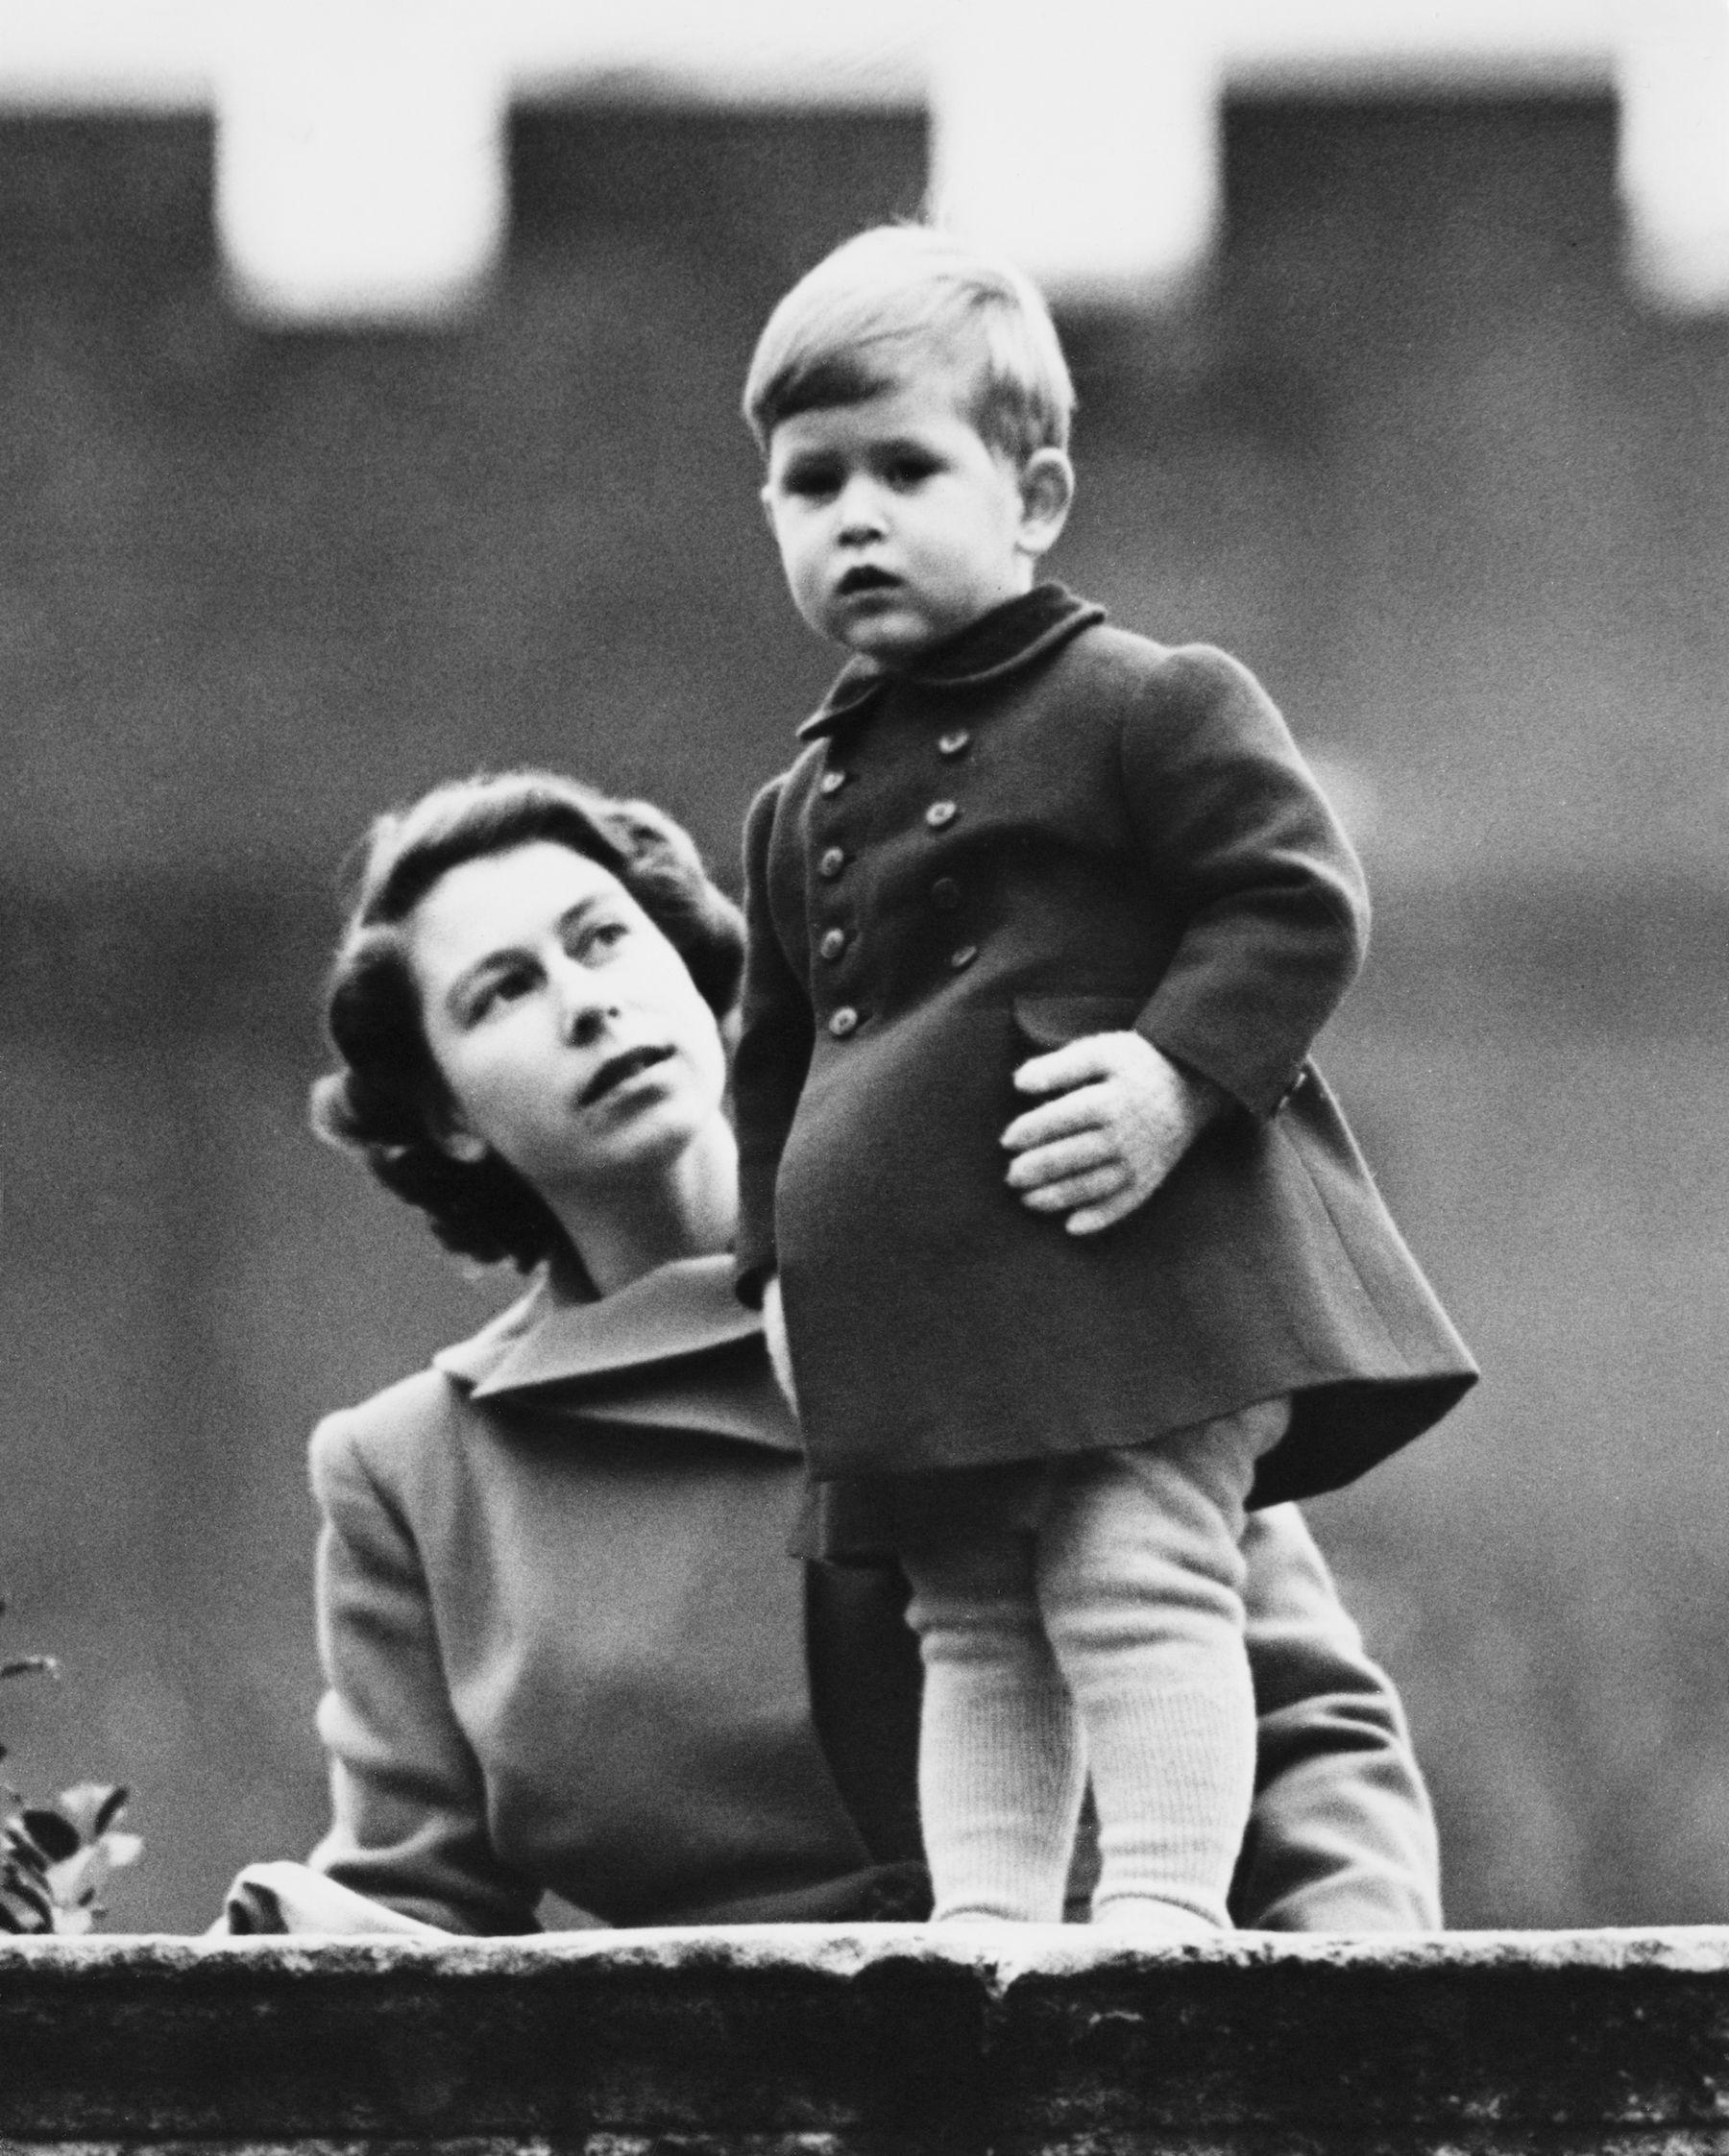 King Charles III in photos, from when he was young to his